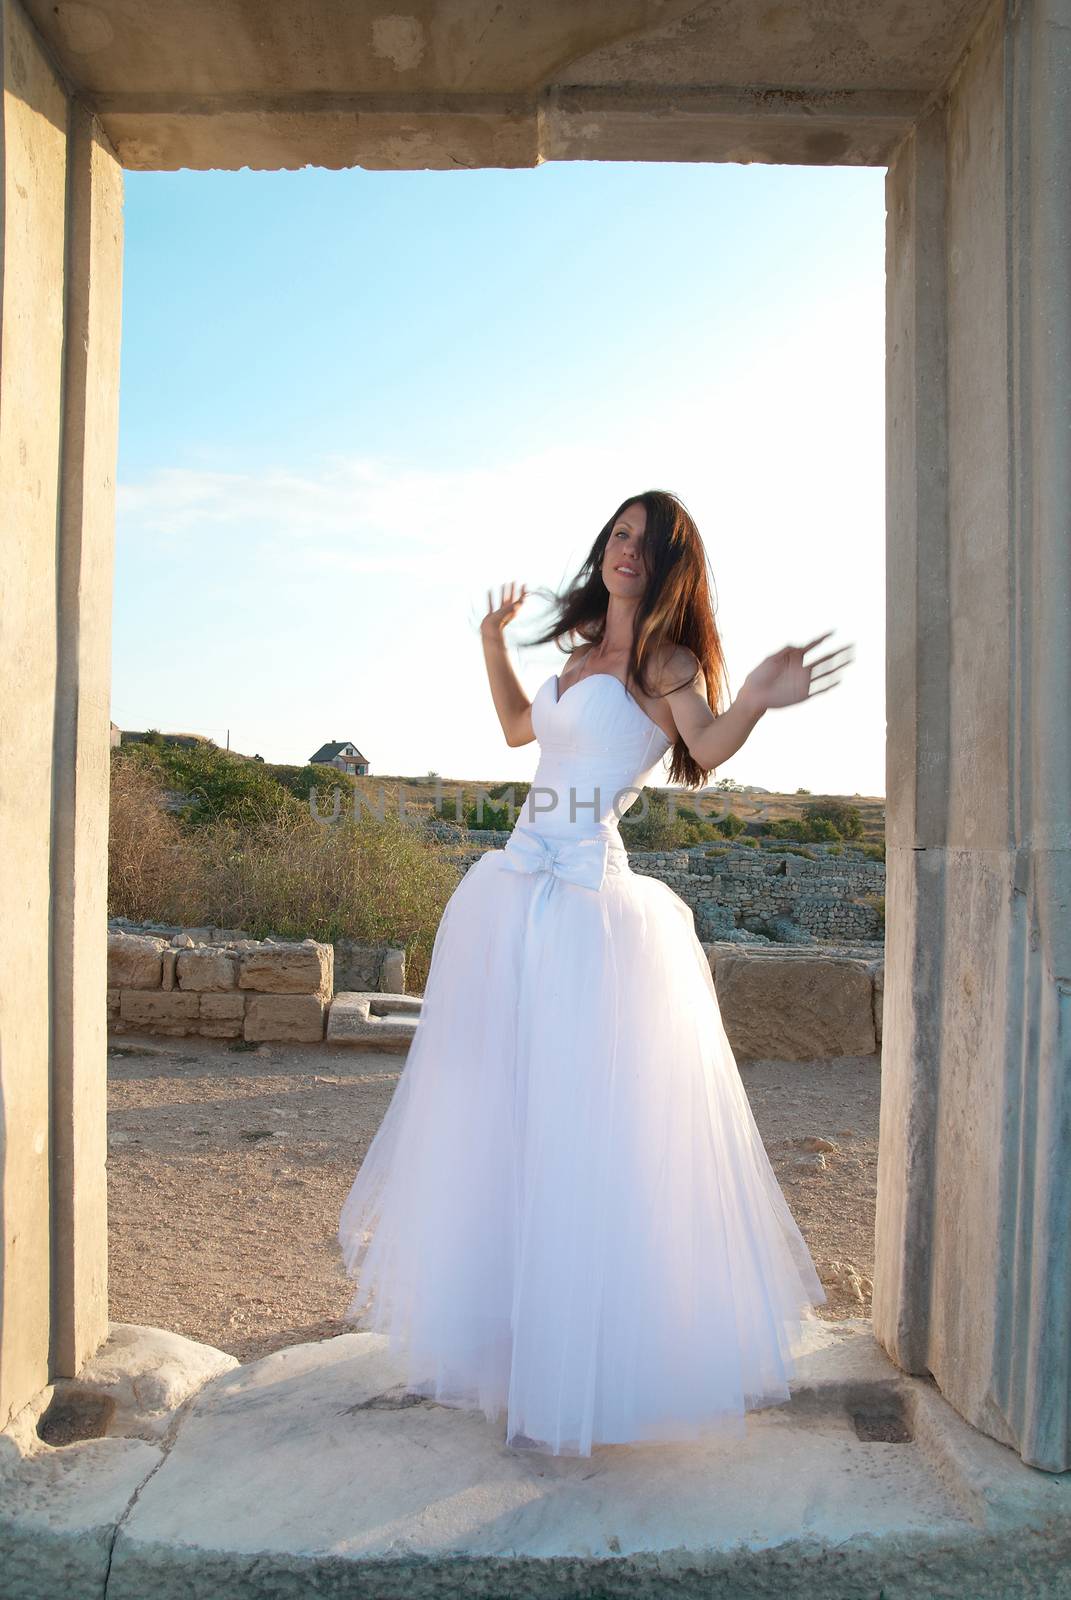 Beautiful bride in the white dress The greece ancient door